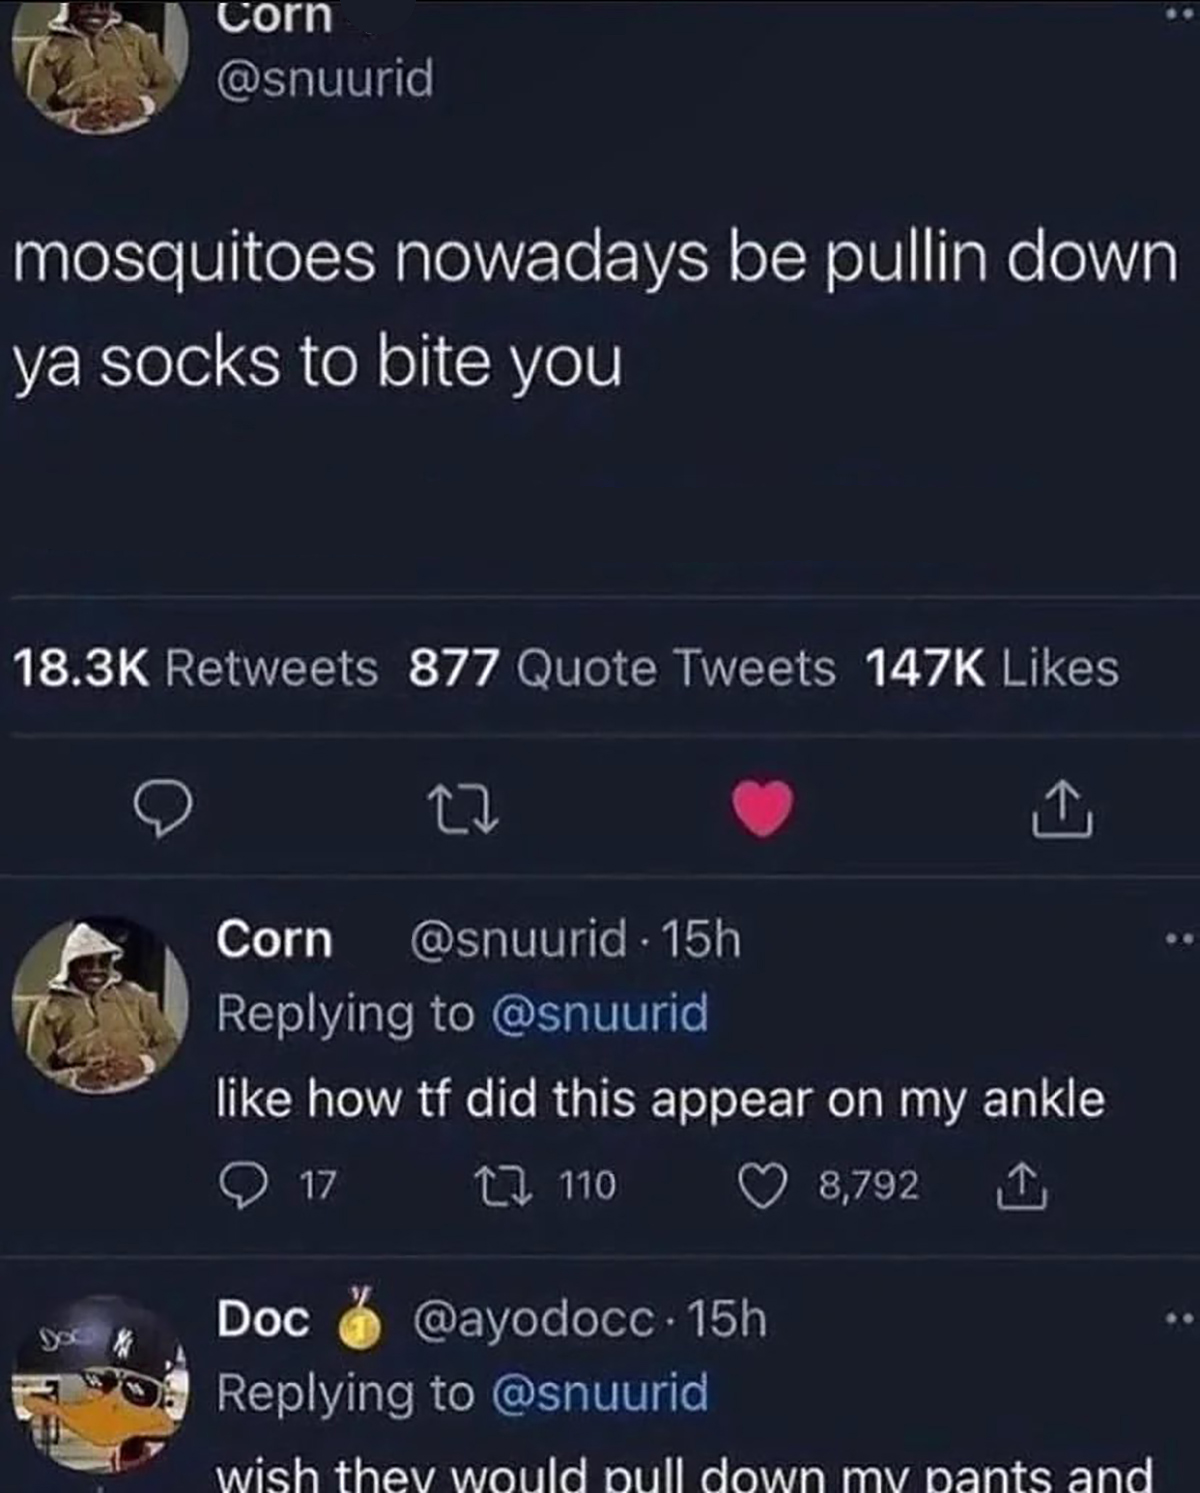 mosquitoes be pulling down your socks to bite you - Corn mosquitoes nowadays be pullin down ya socks to bite you 877 Quote Tweets 27 Corn 15h how tf did this appear on my ankle 17 110 8,792 Doc 15h wish they would pull down my pants and